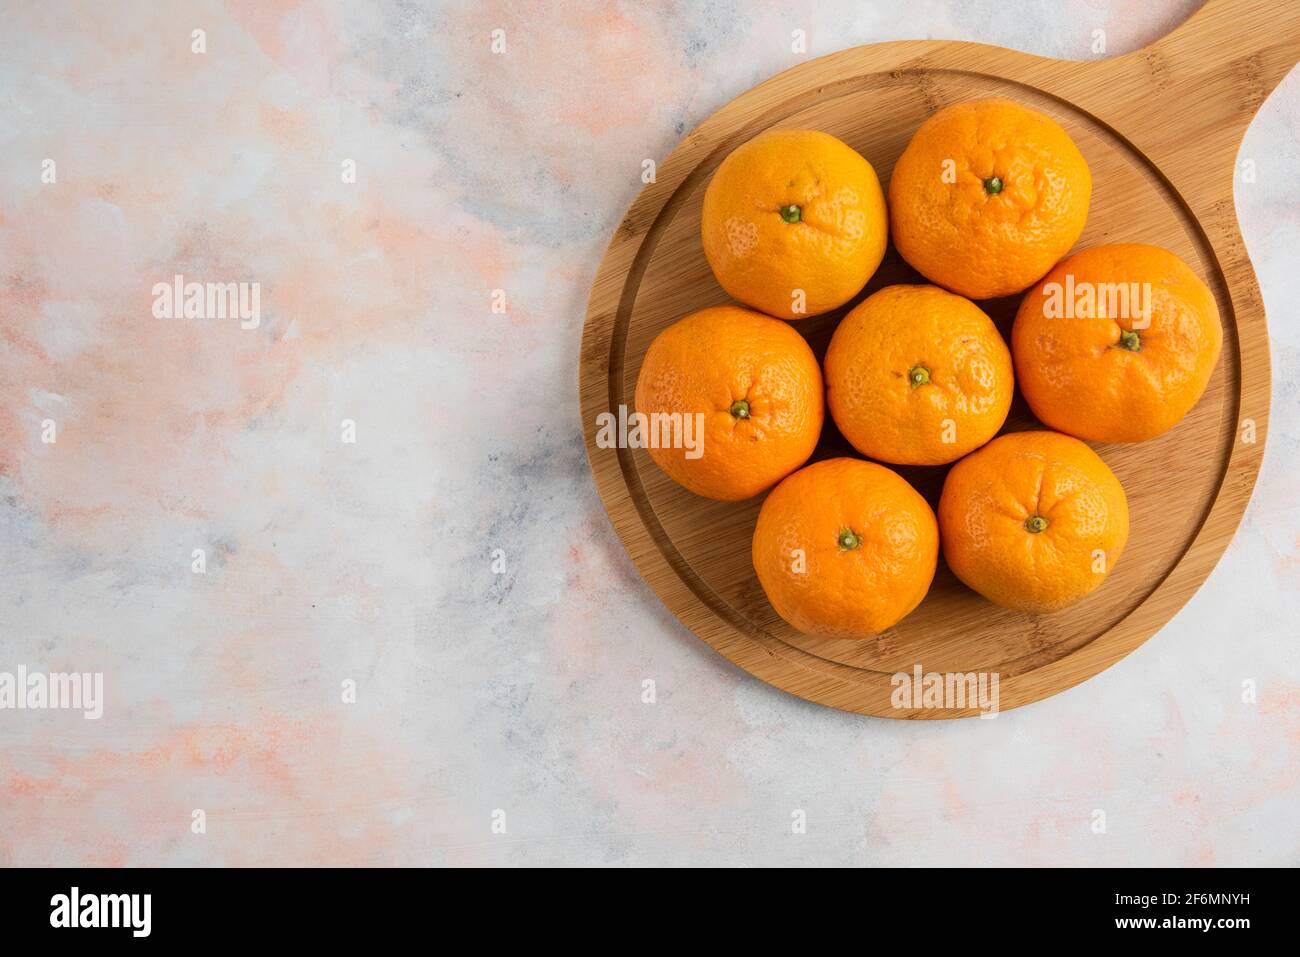 Pile of clementine mandarins over wooden cutting board Stock Photo